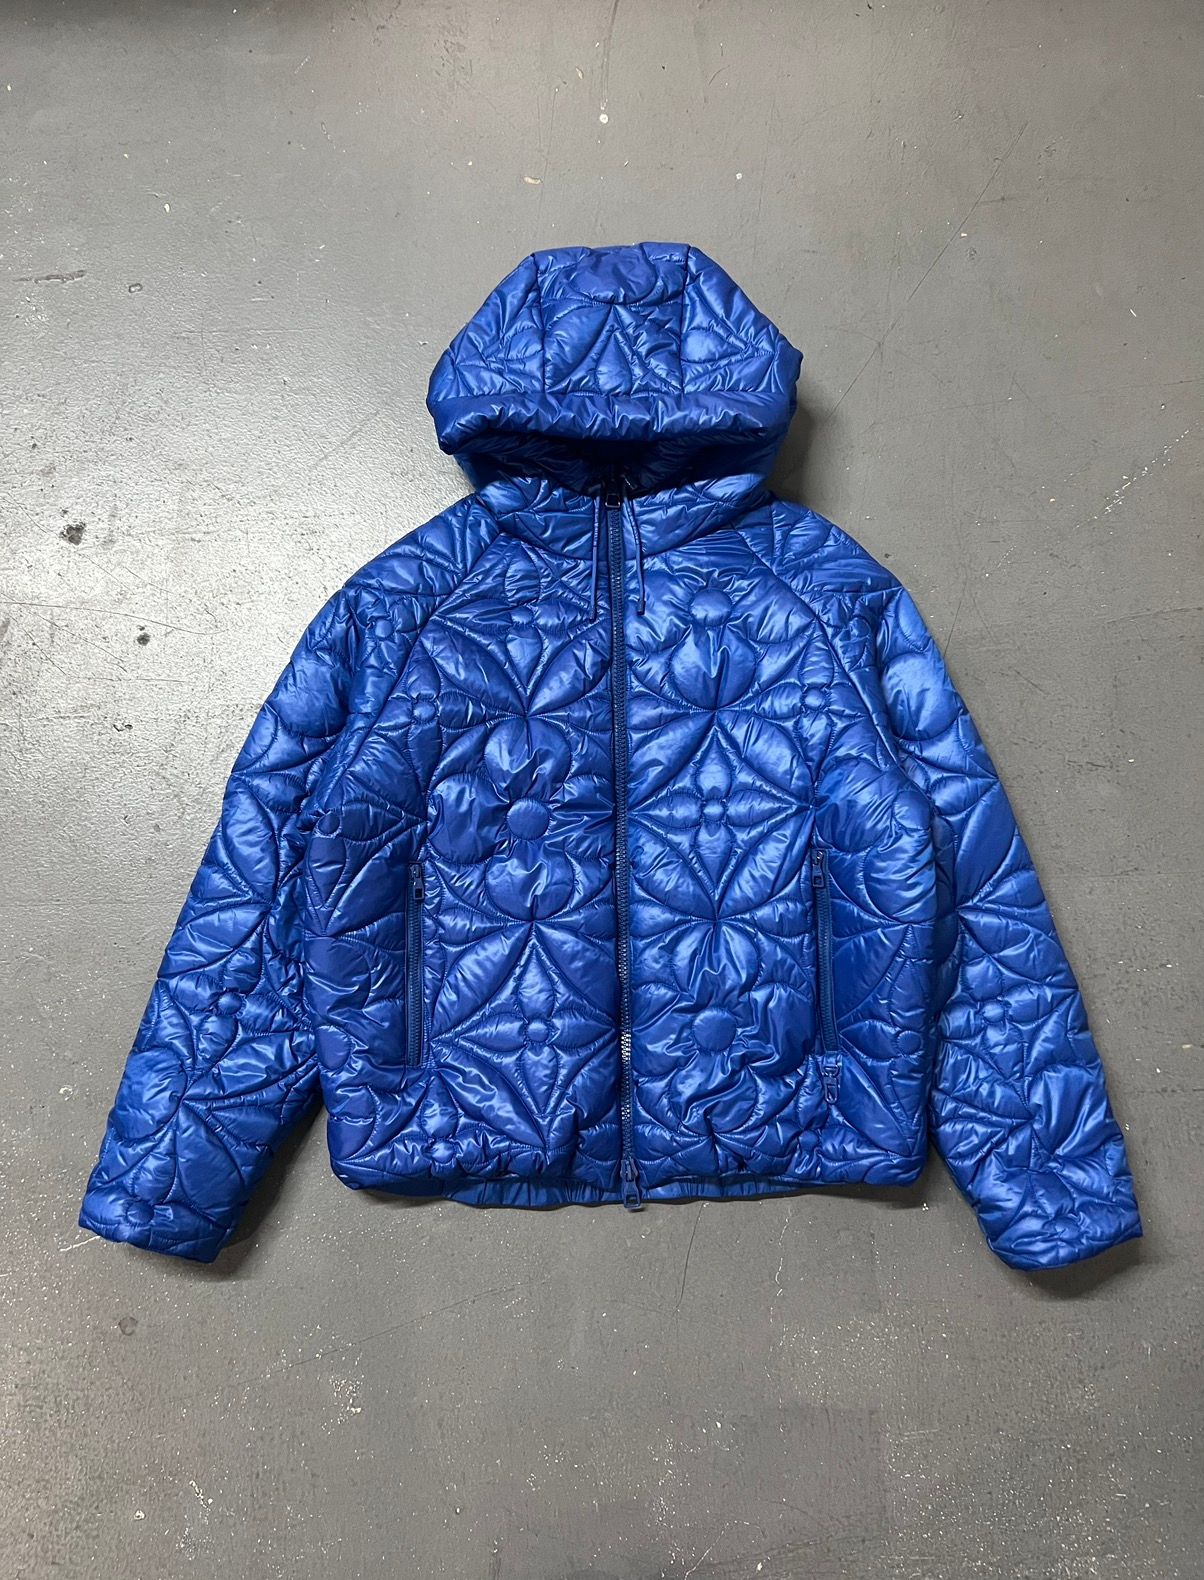 LOUIS VUITTON Lvse Flower Quilted Hoodie Jacket Blue. Size 46